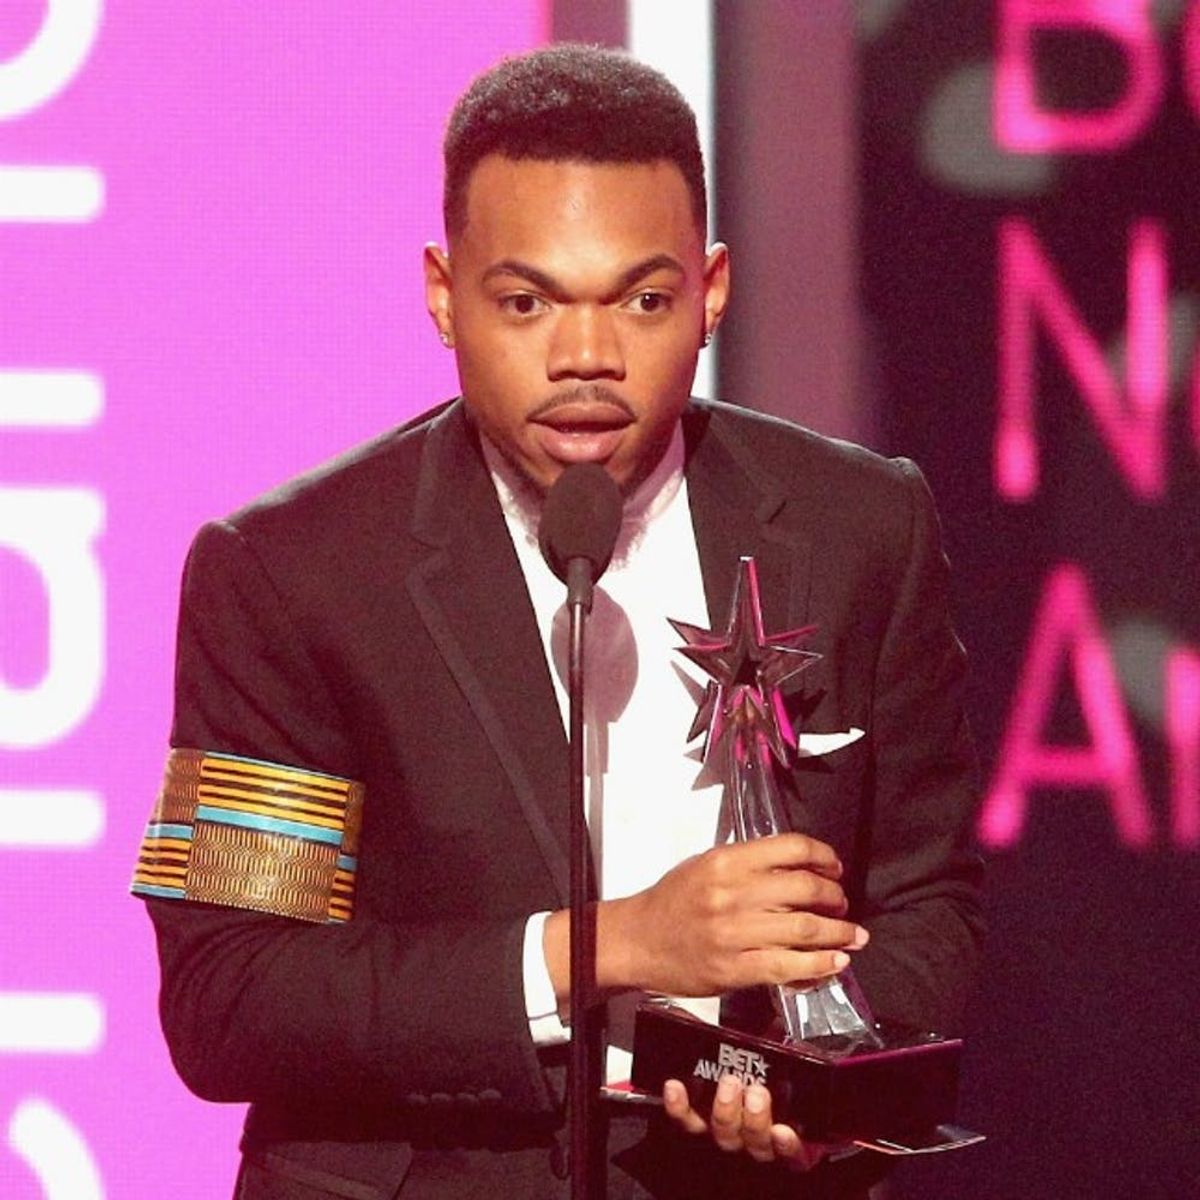 Chance The Rapper’s Passionate BET Awards Speech Will Inspire You